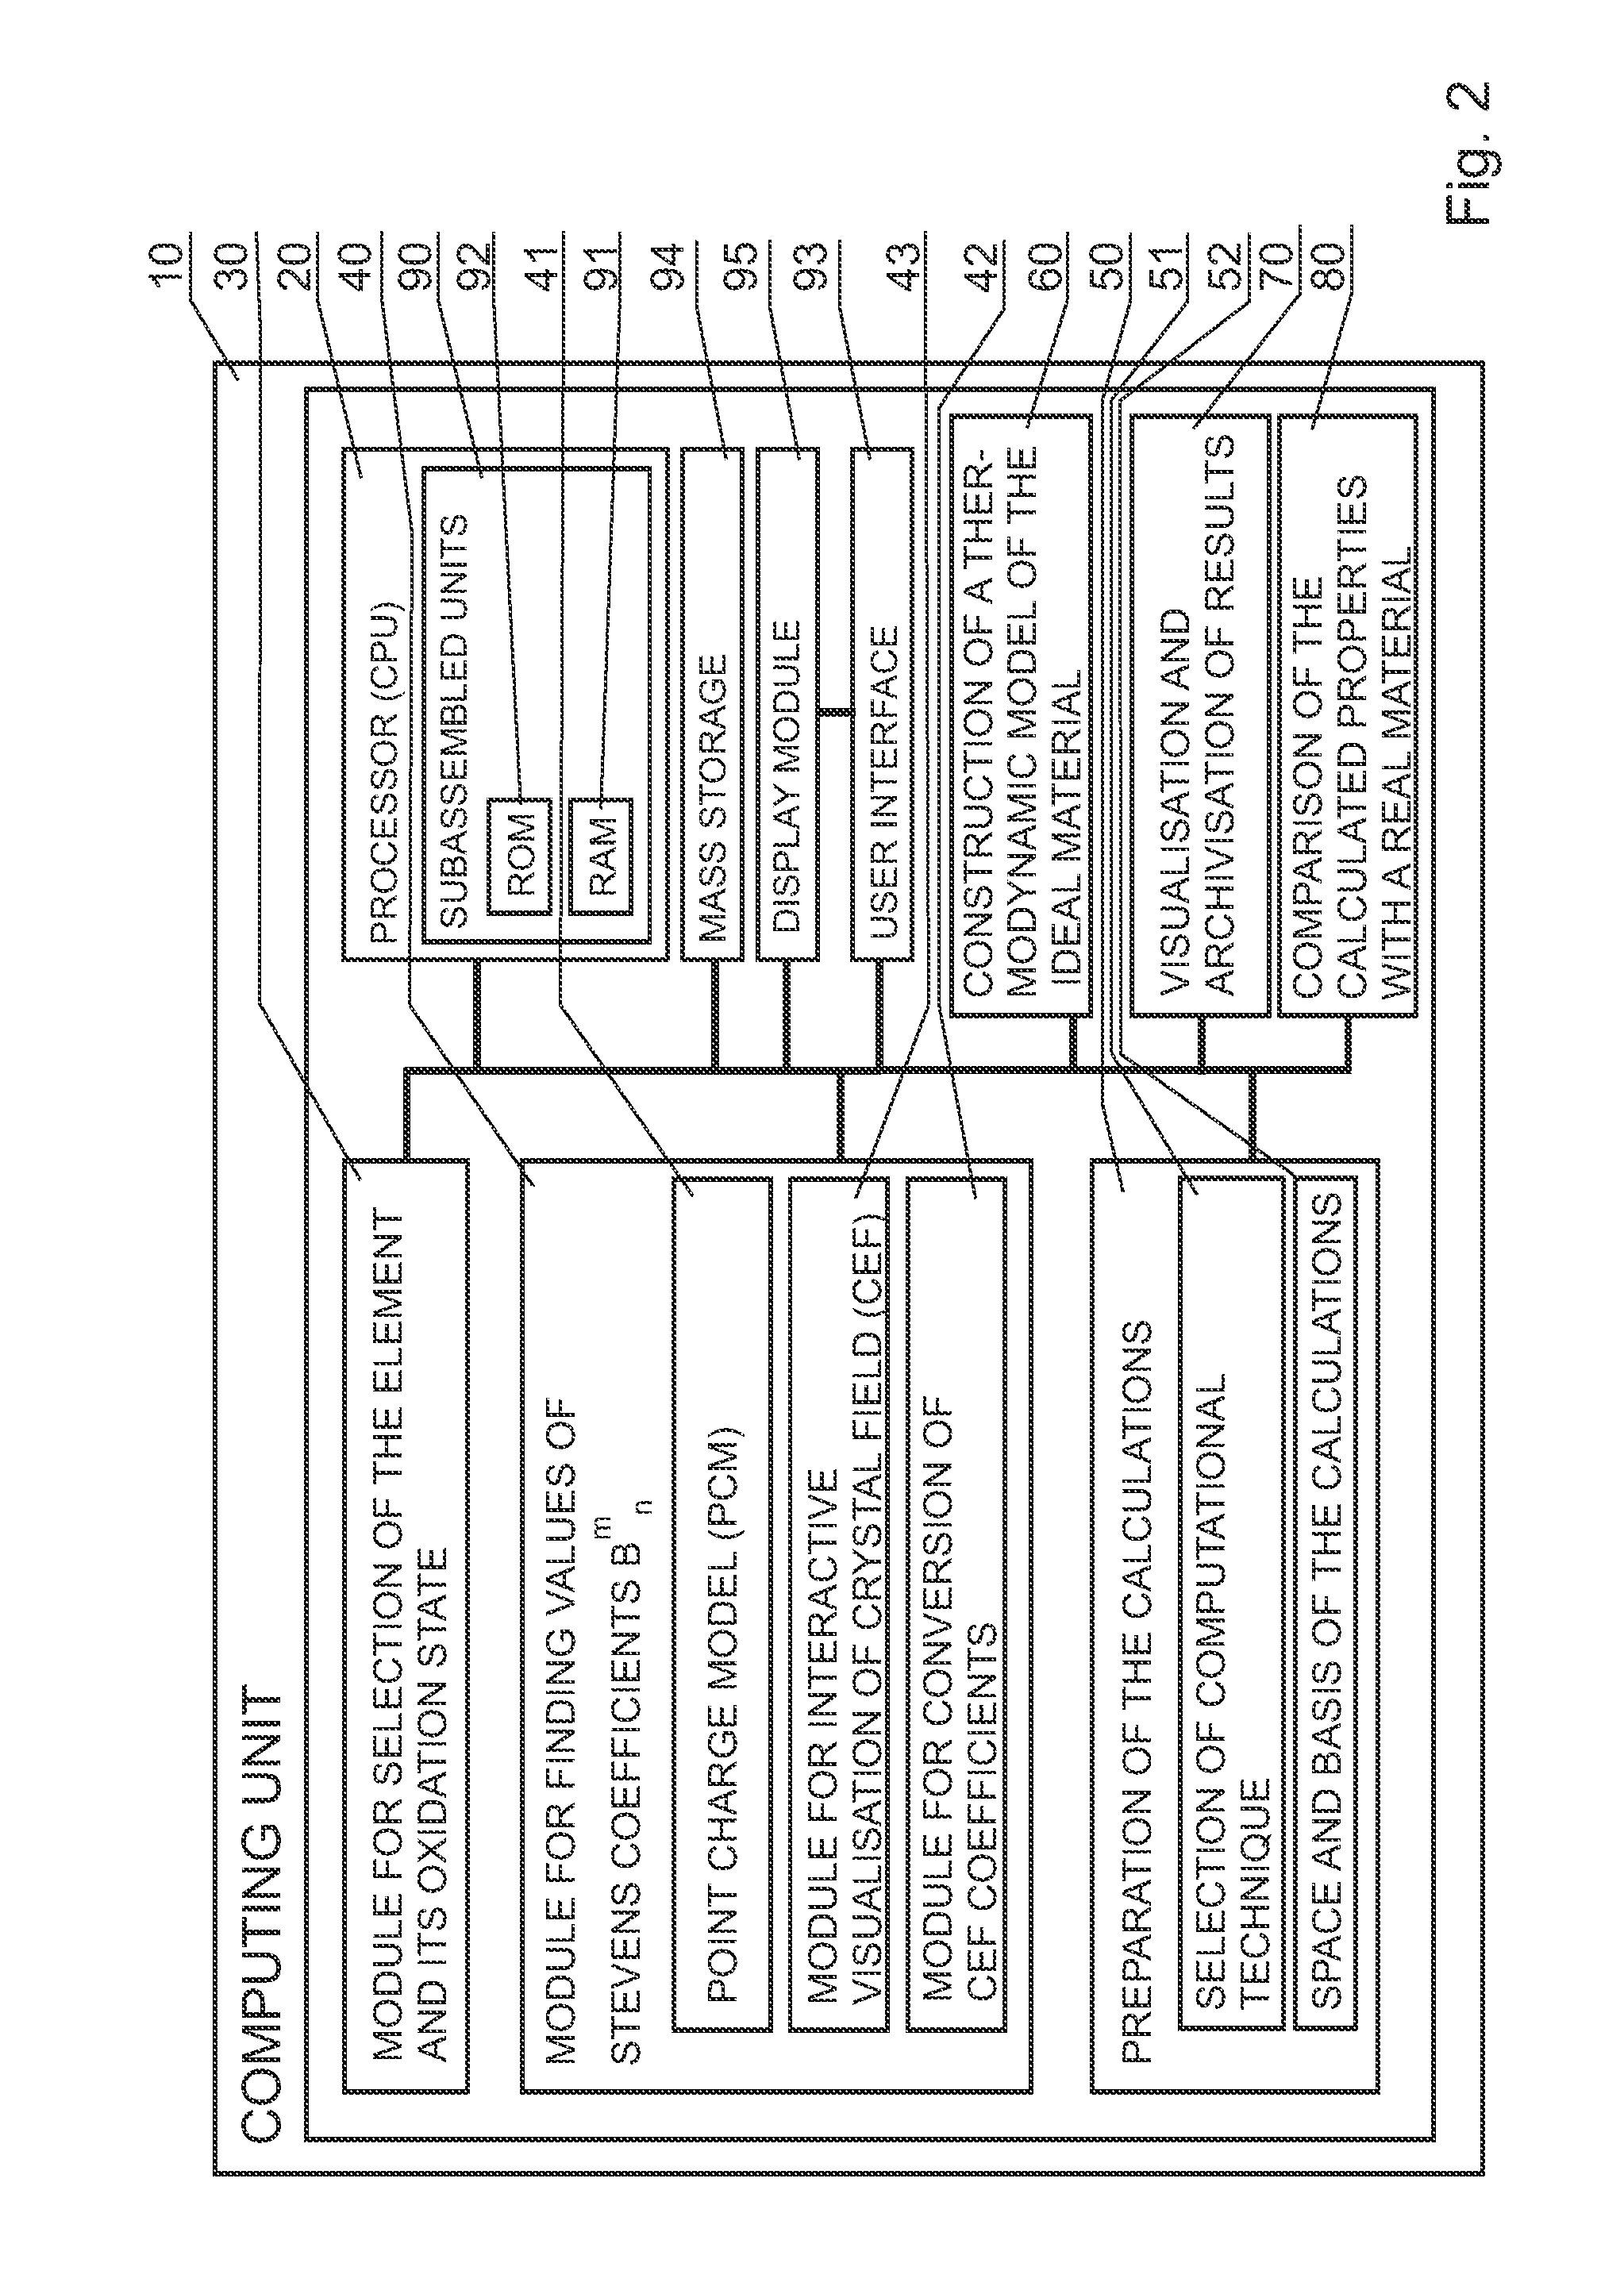 System for optimization of method for determining material properties at finding materials having defined properties and optimization of method for determining material properties at finding materials having defined properties